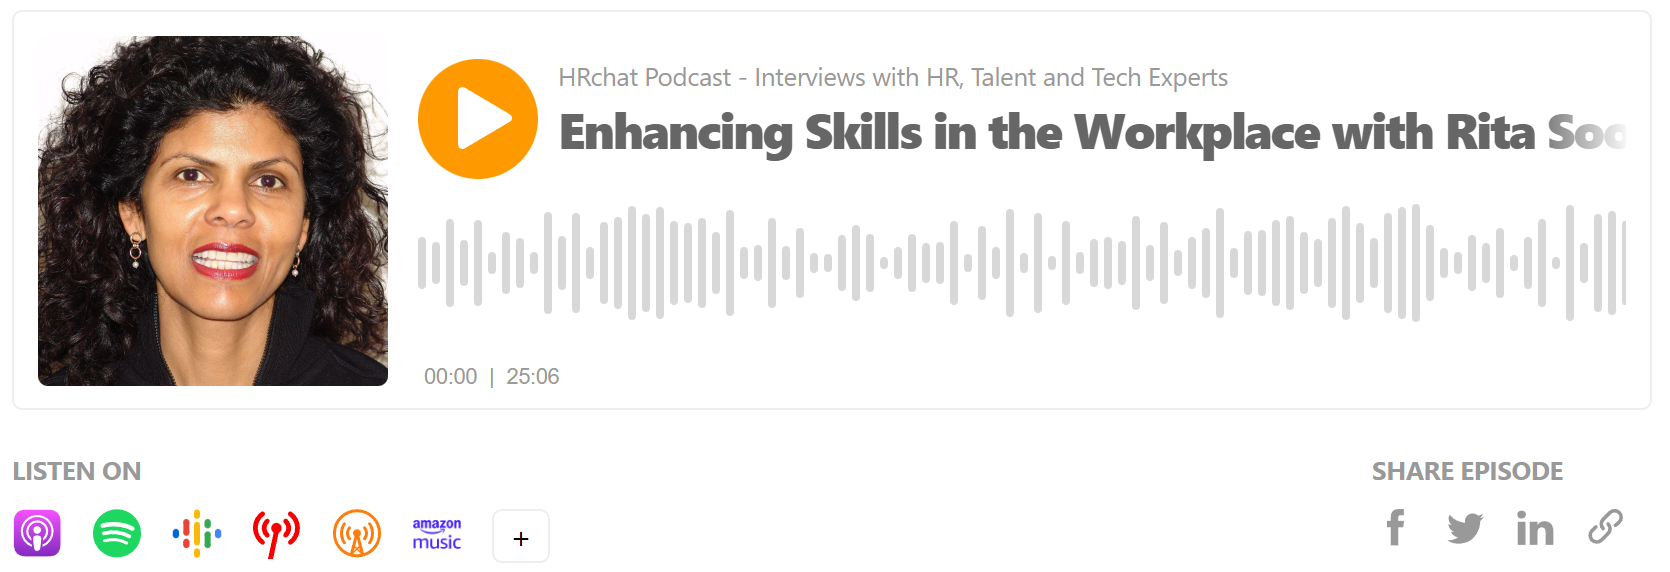 Enhancing Skills in the Workplace with Rita Sookrit, Hemsley Fraser